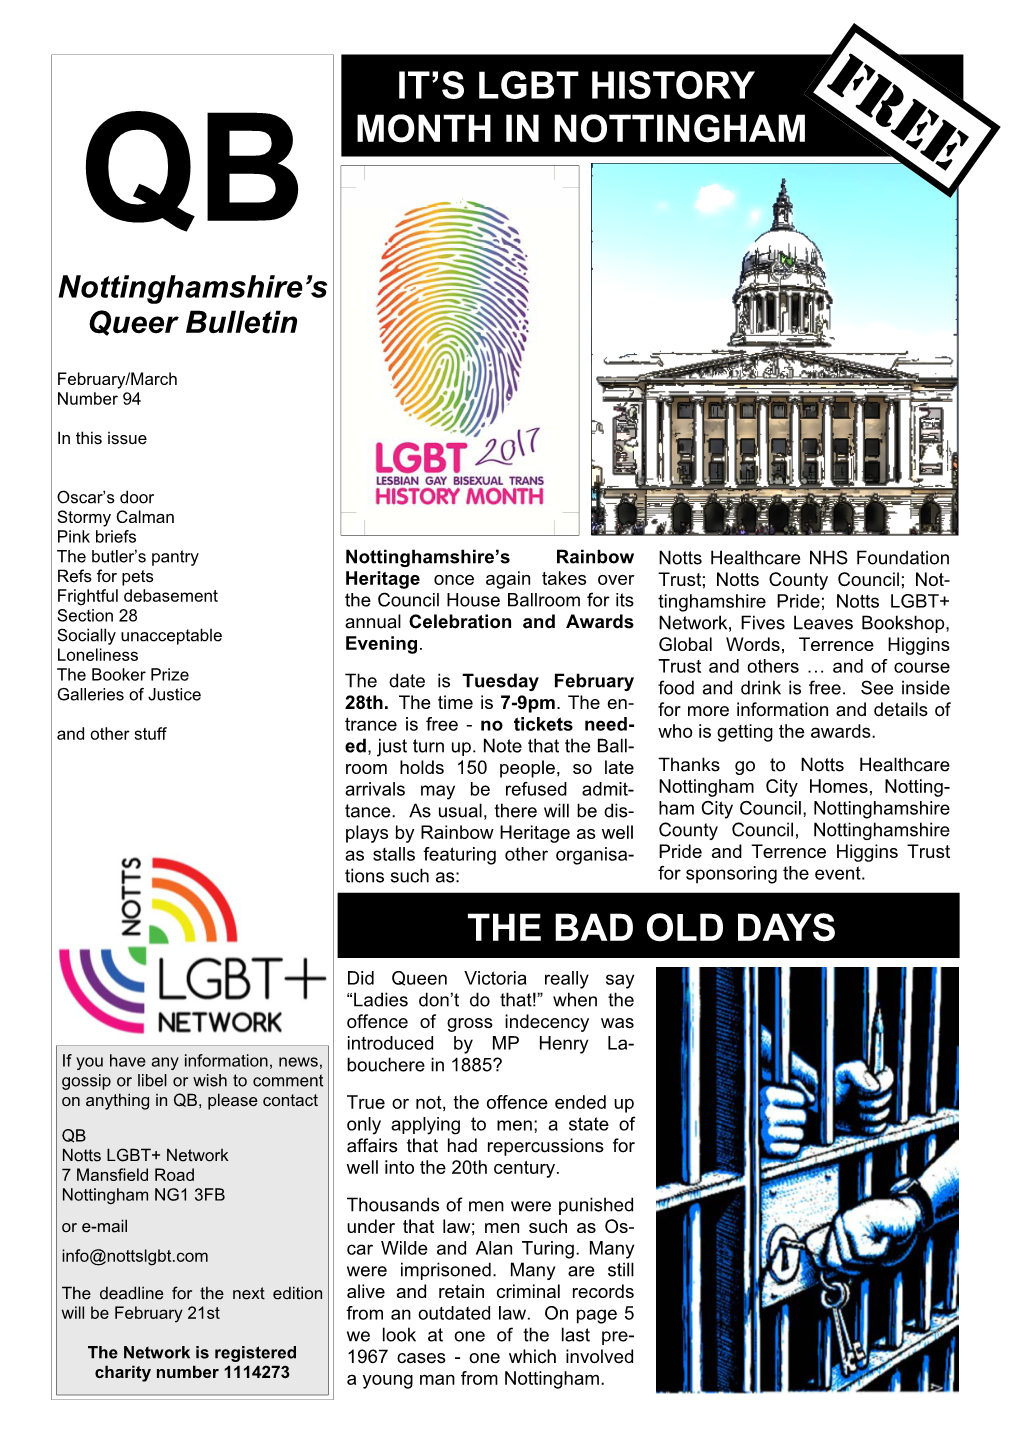 It's Lgbt History Month in Nottingham Free the Bad